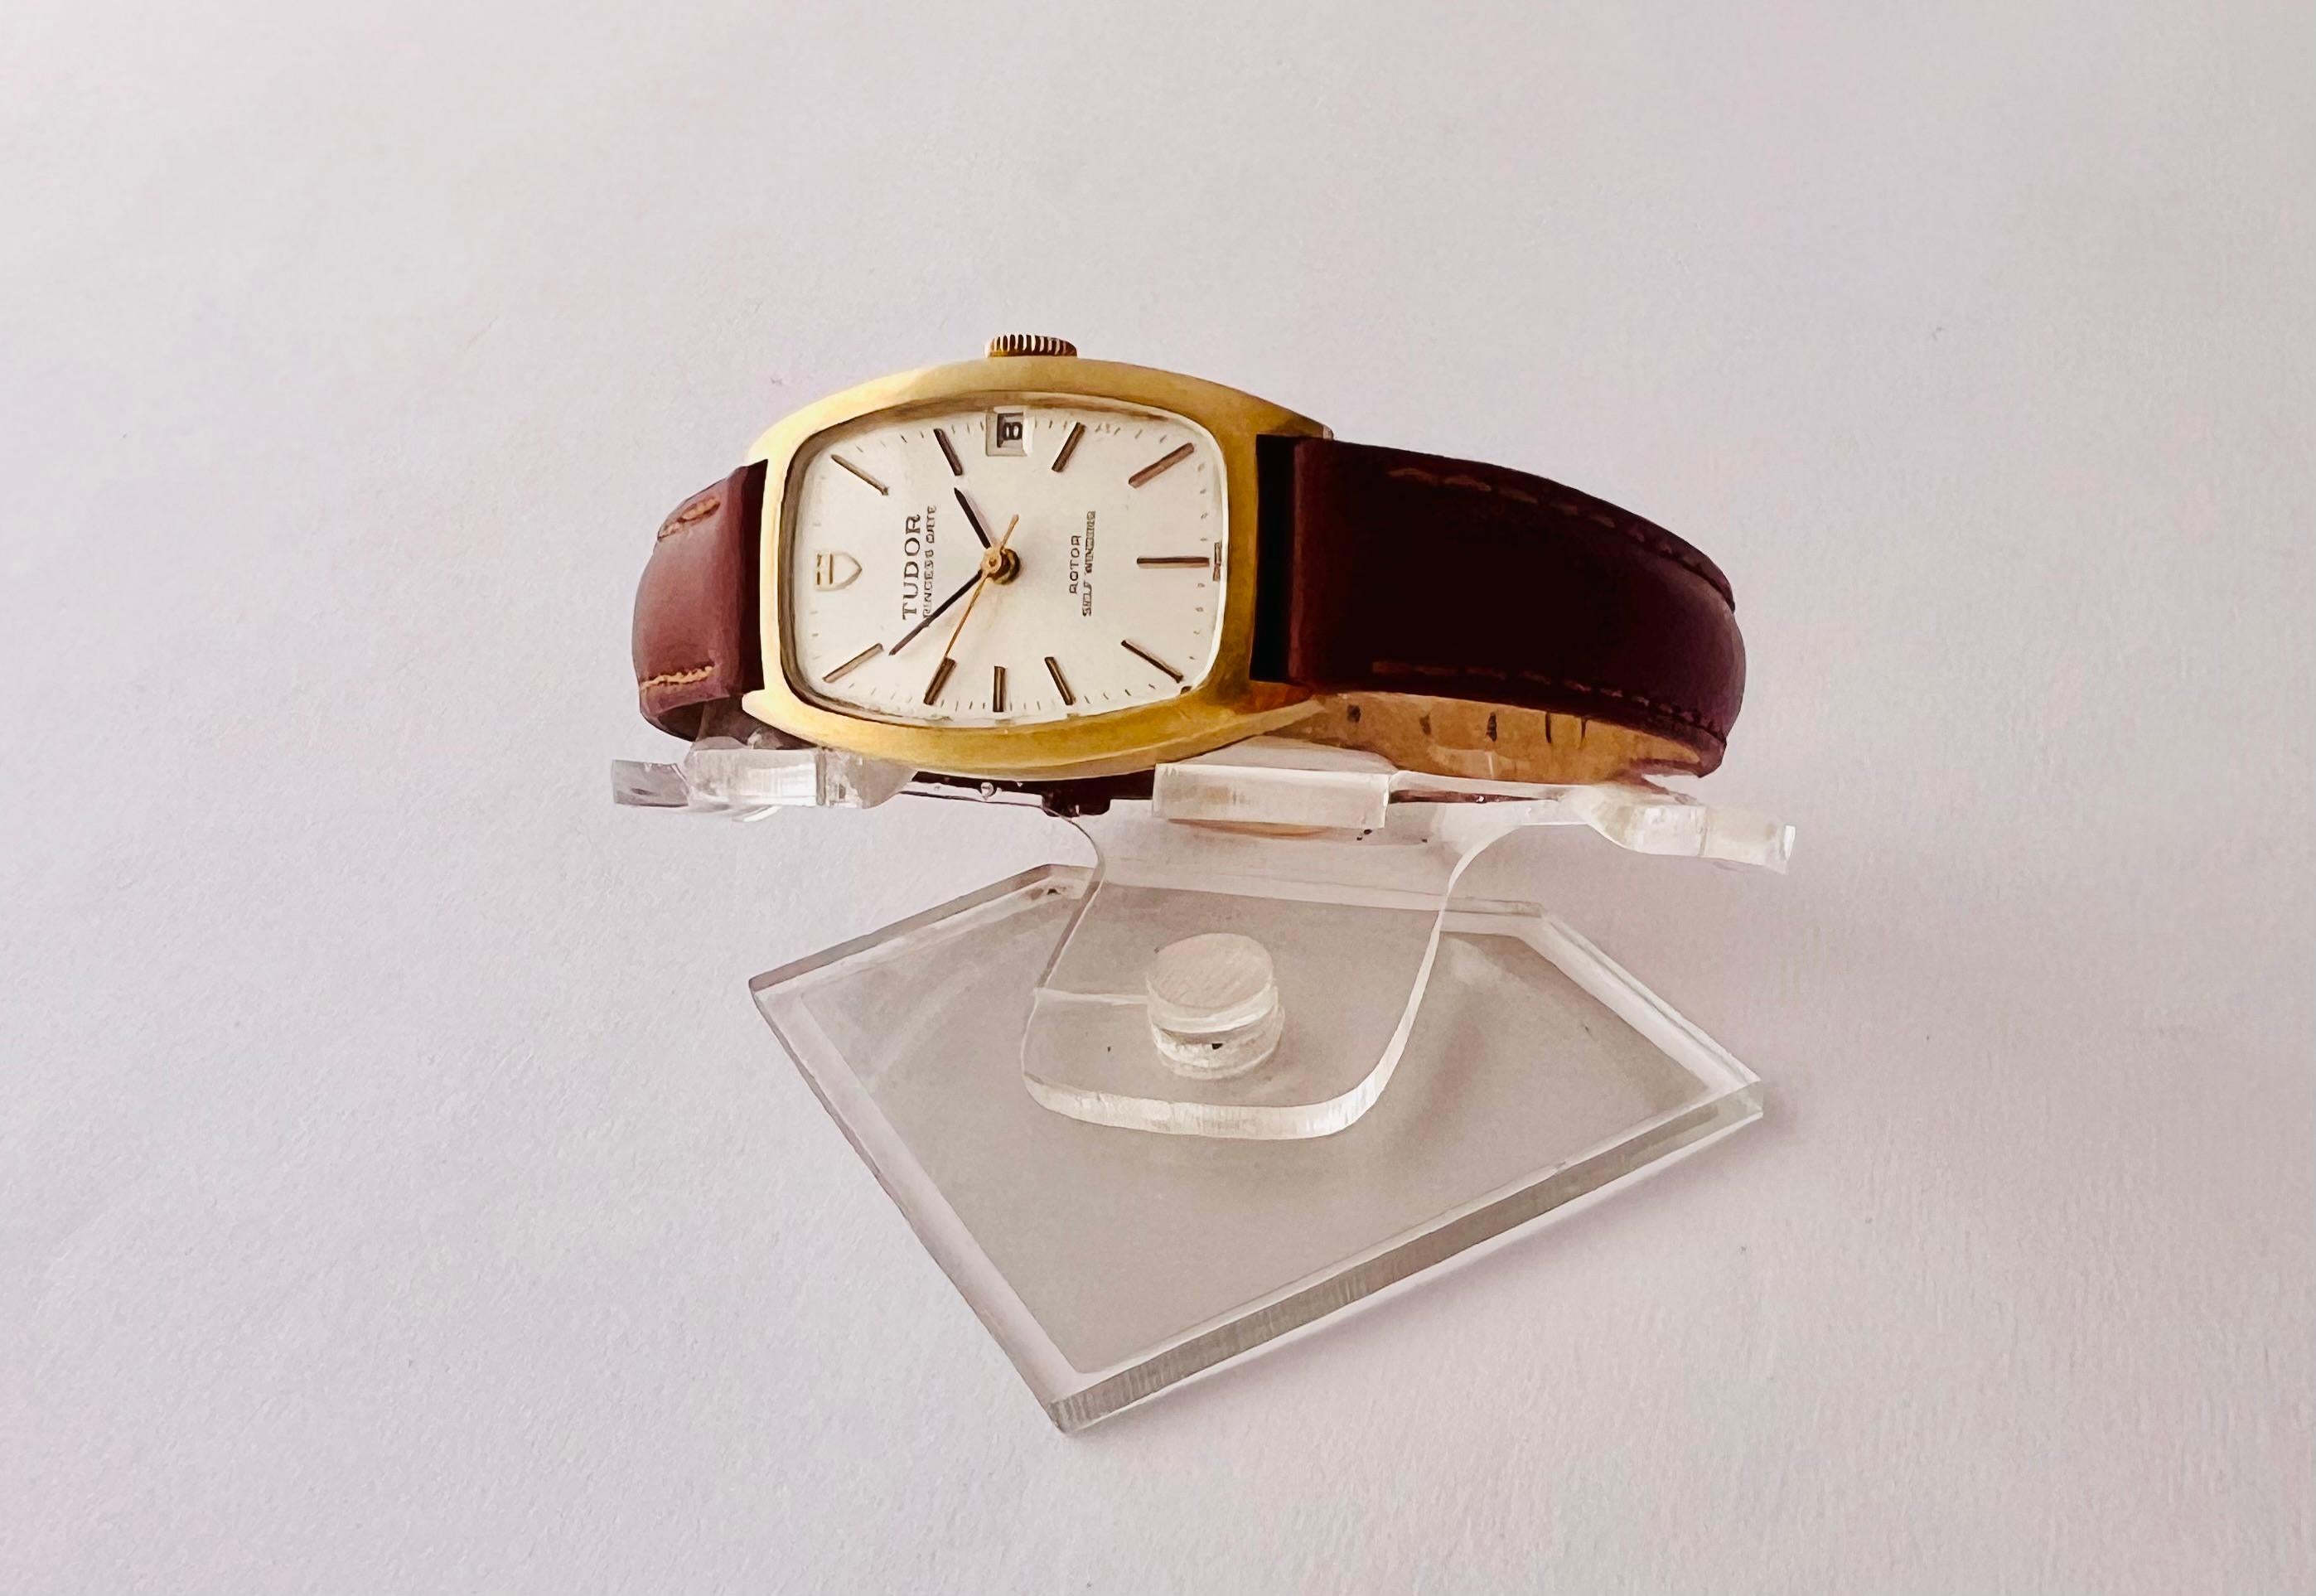 Brand : Tudor

Model: Princess Date  

Country Of Manufacture: Switzerland

Movement: Automatic Hand Wind

Case Material: 18K Solid Yellow Gold

Measurements : 21mm diameter (excluding crown ) x 32 mm

Band Type : Brown Genuine Leather

Band